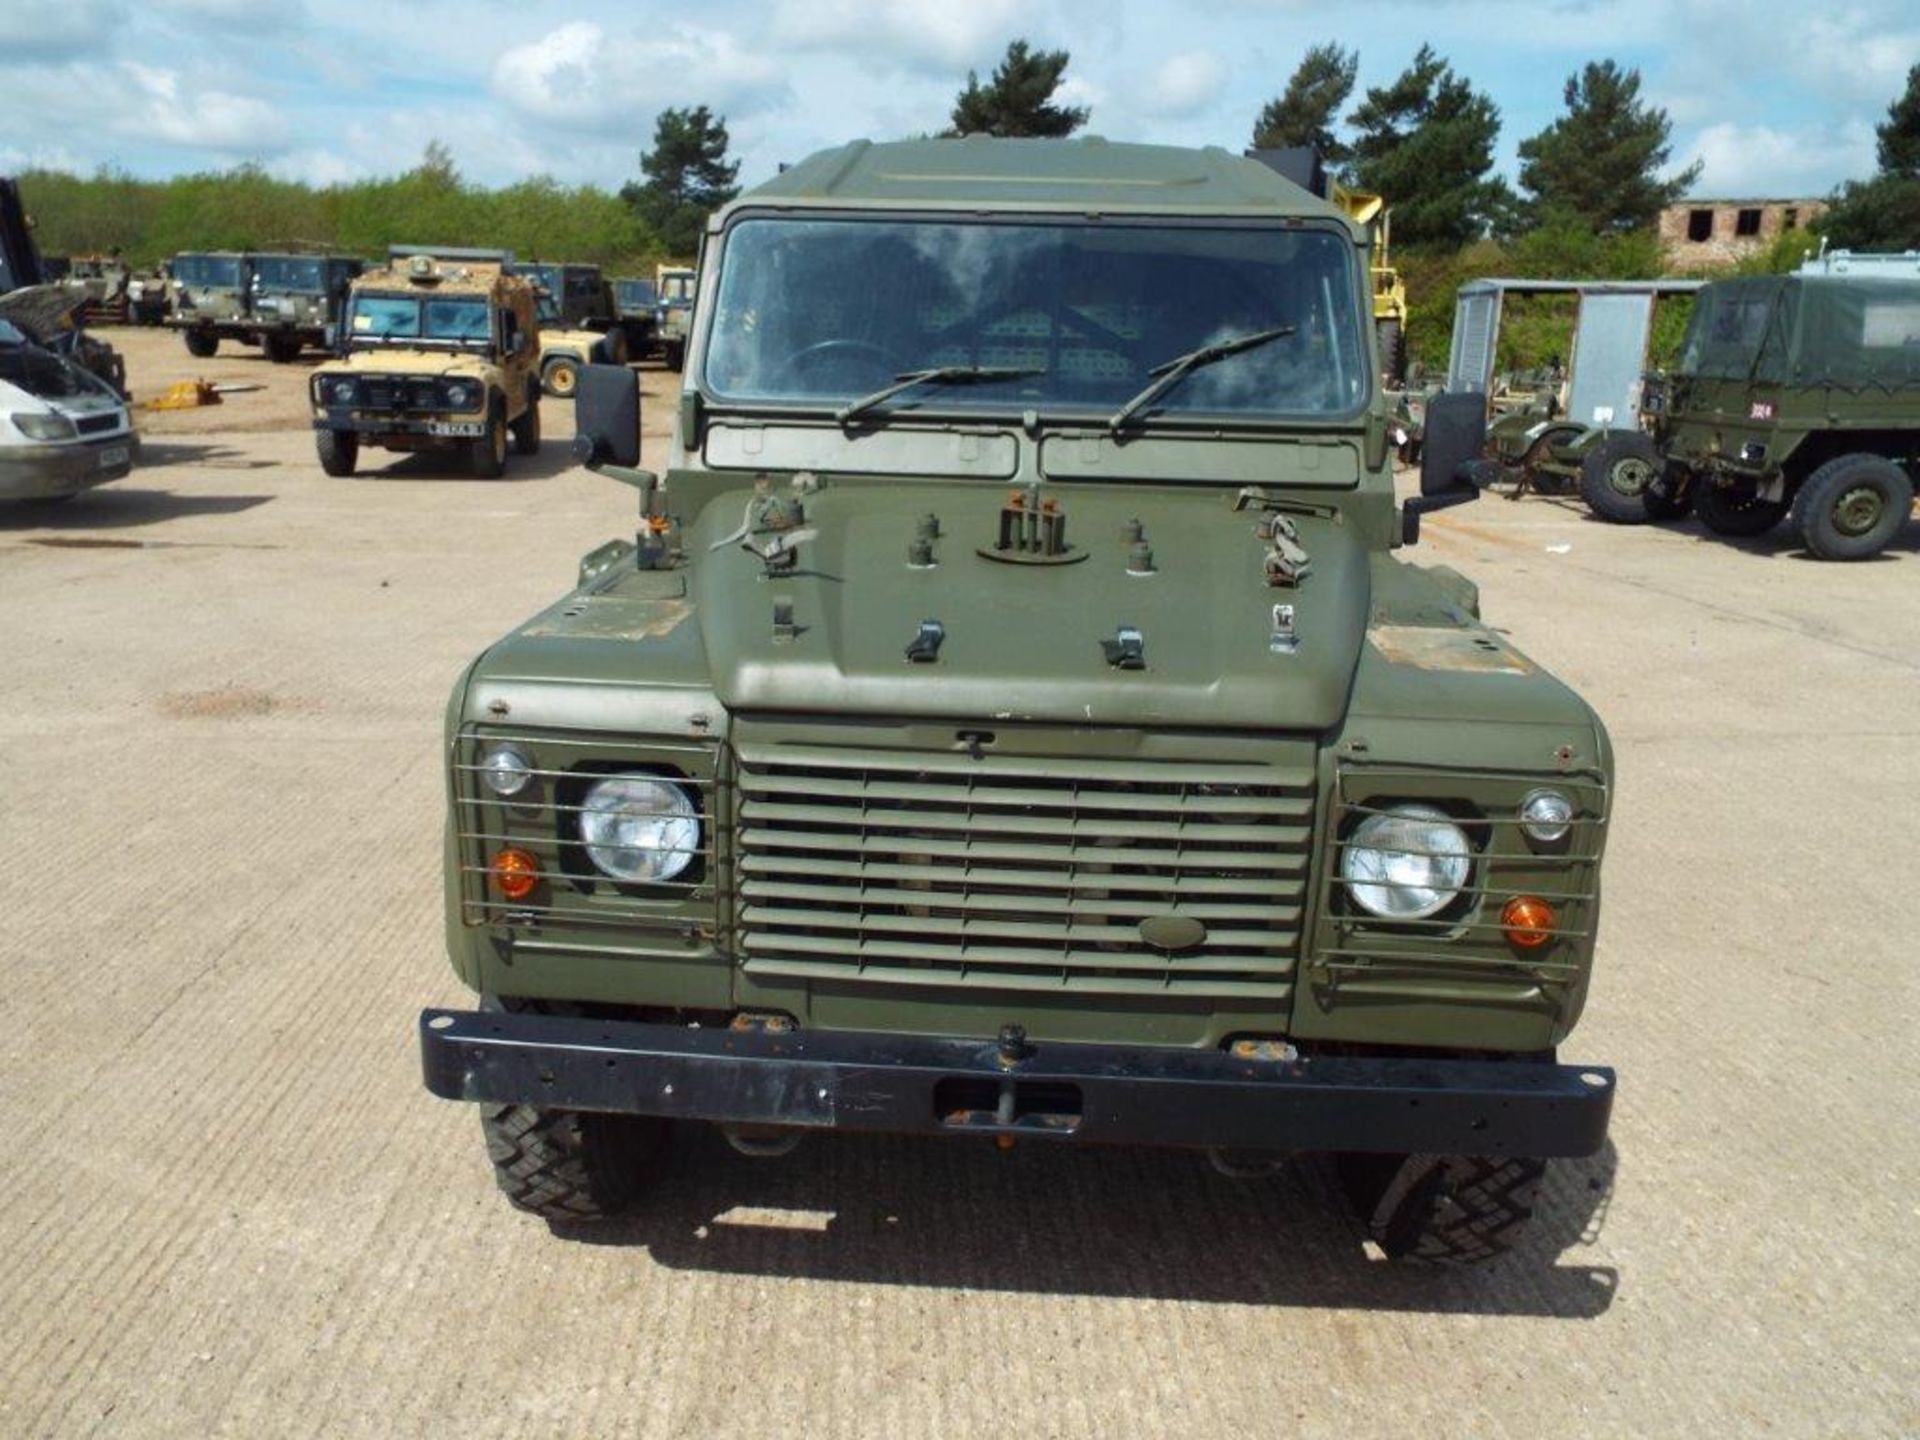 Military Specification Land Rover Wolf 110 Hard Top - Image 2 of 26